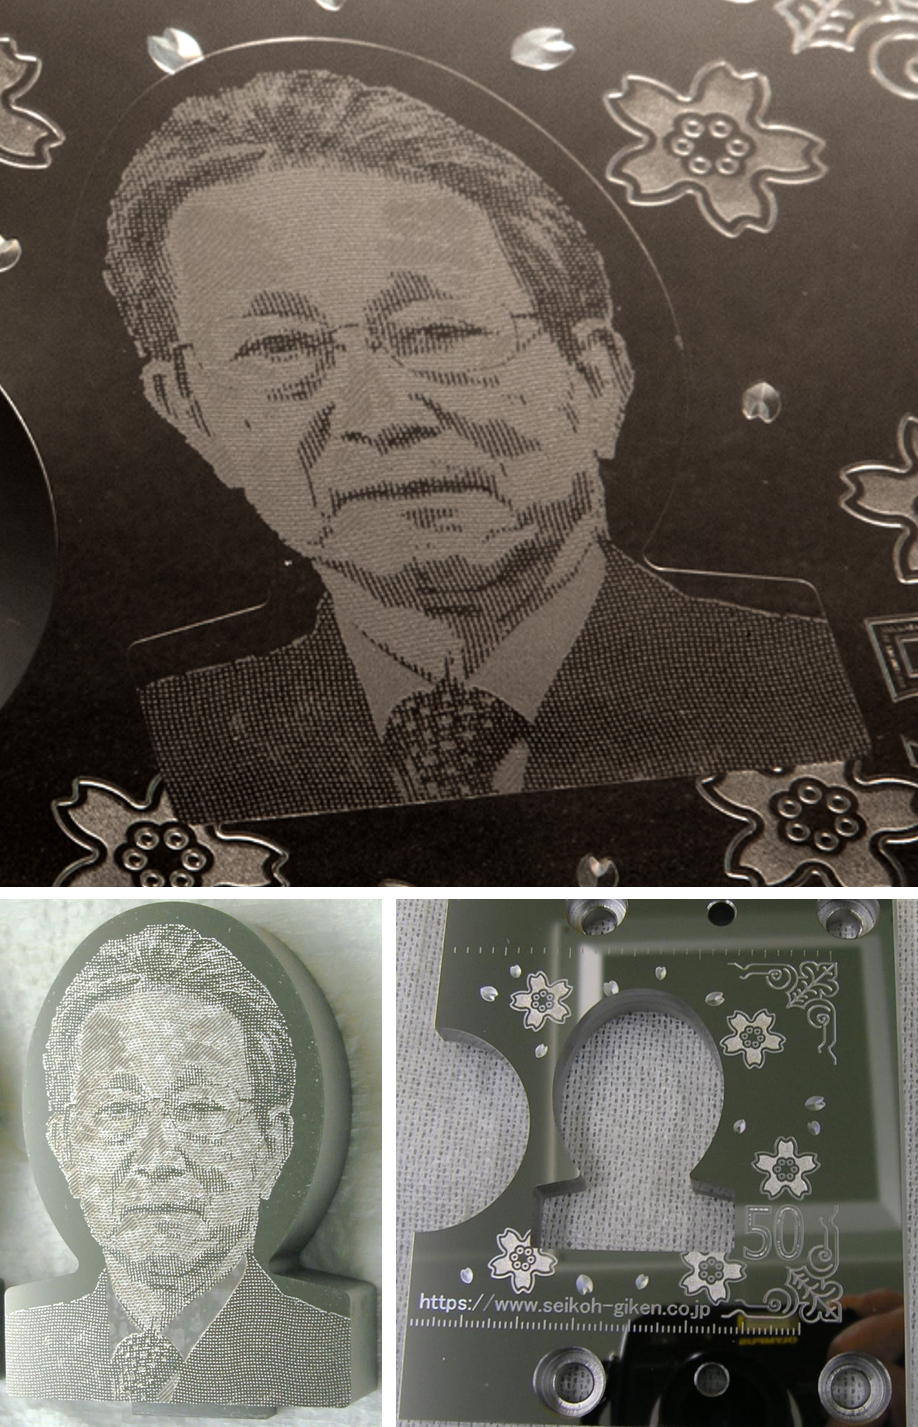 SEIKOH GIKEN 50th Anniversary sample Portrait of the President and Chief Executive Officer with a highly transparent background (mirror finishing)